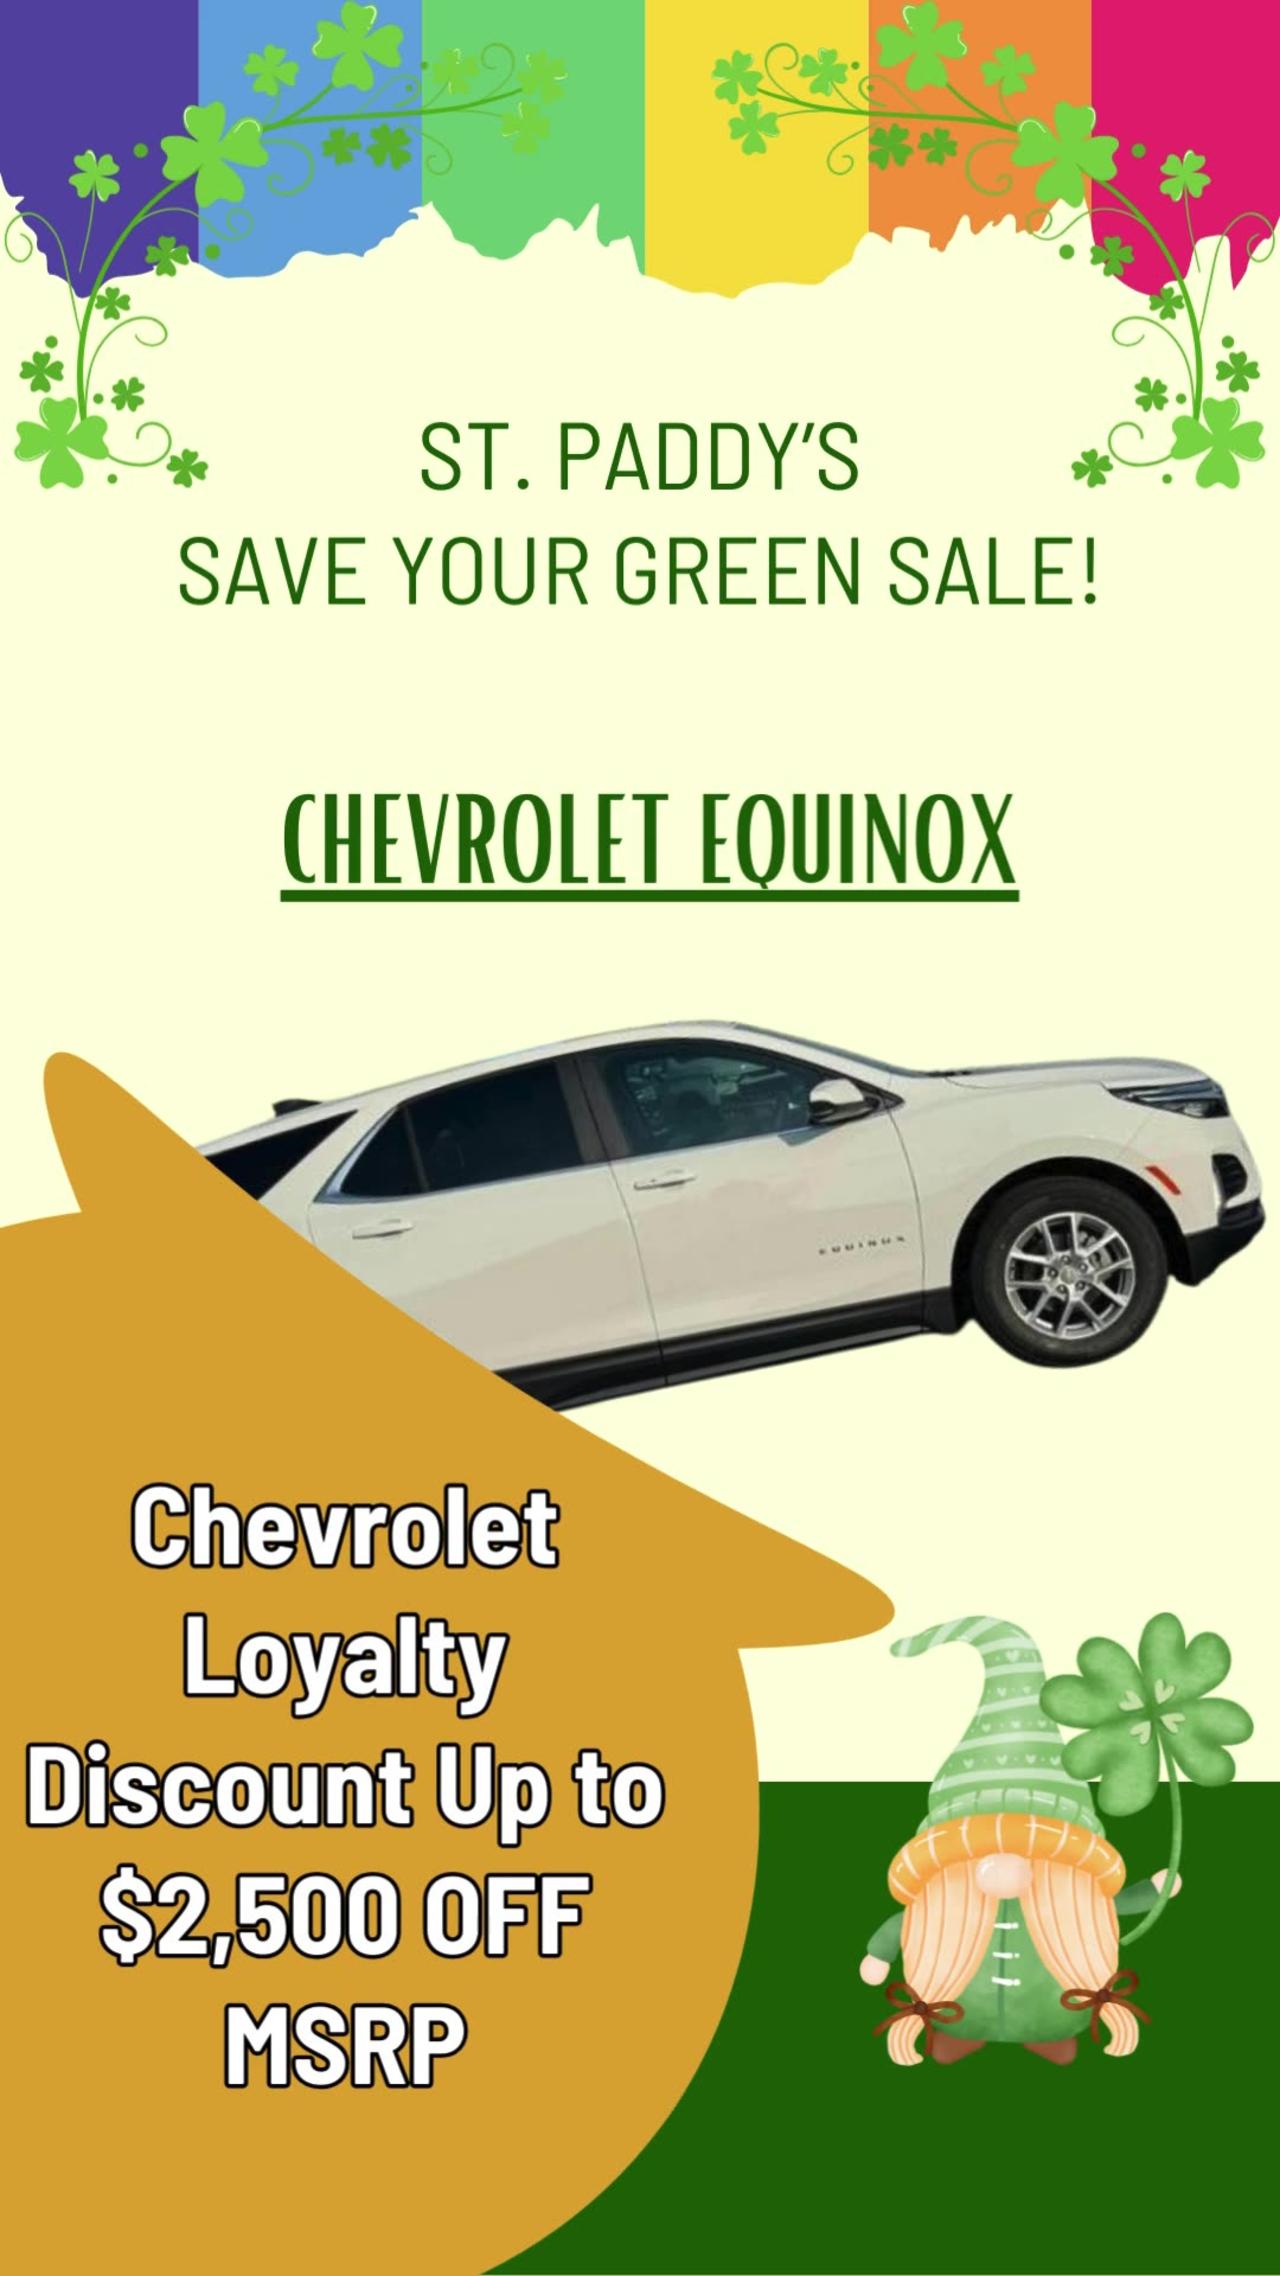 ST. PADDY’S SAVE YOUR GREEN SALE!